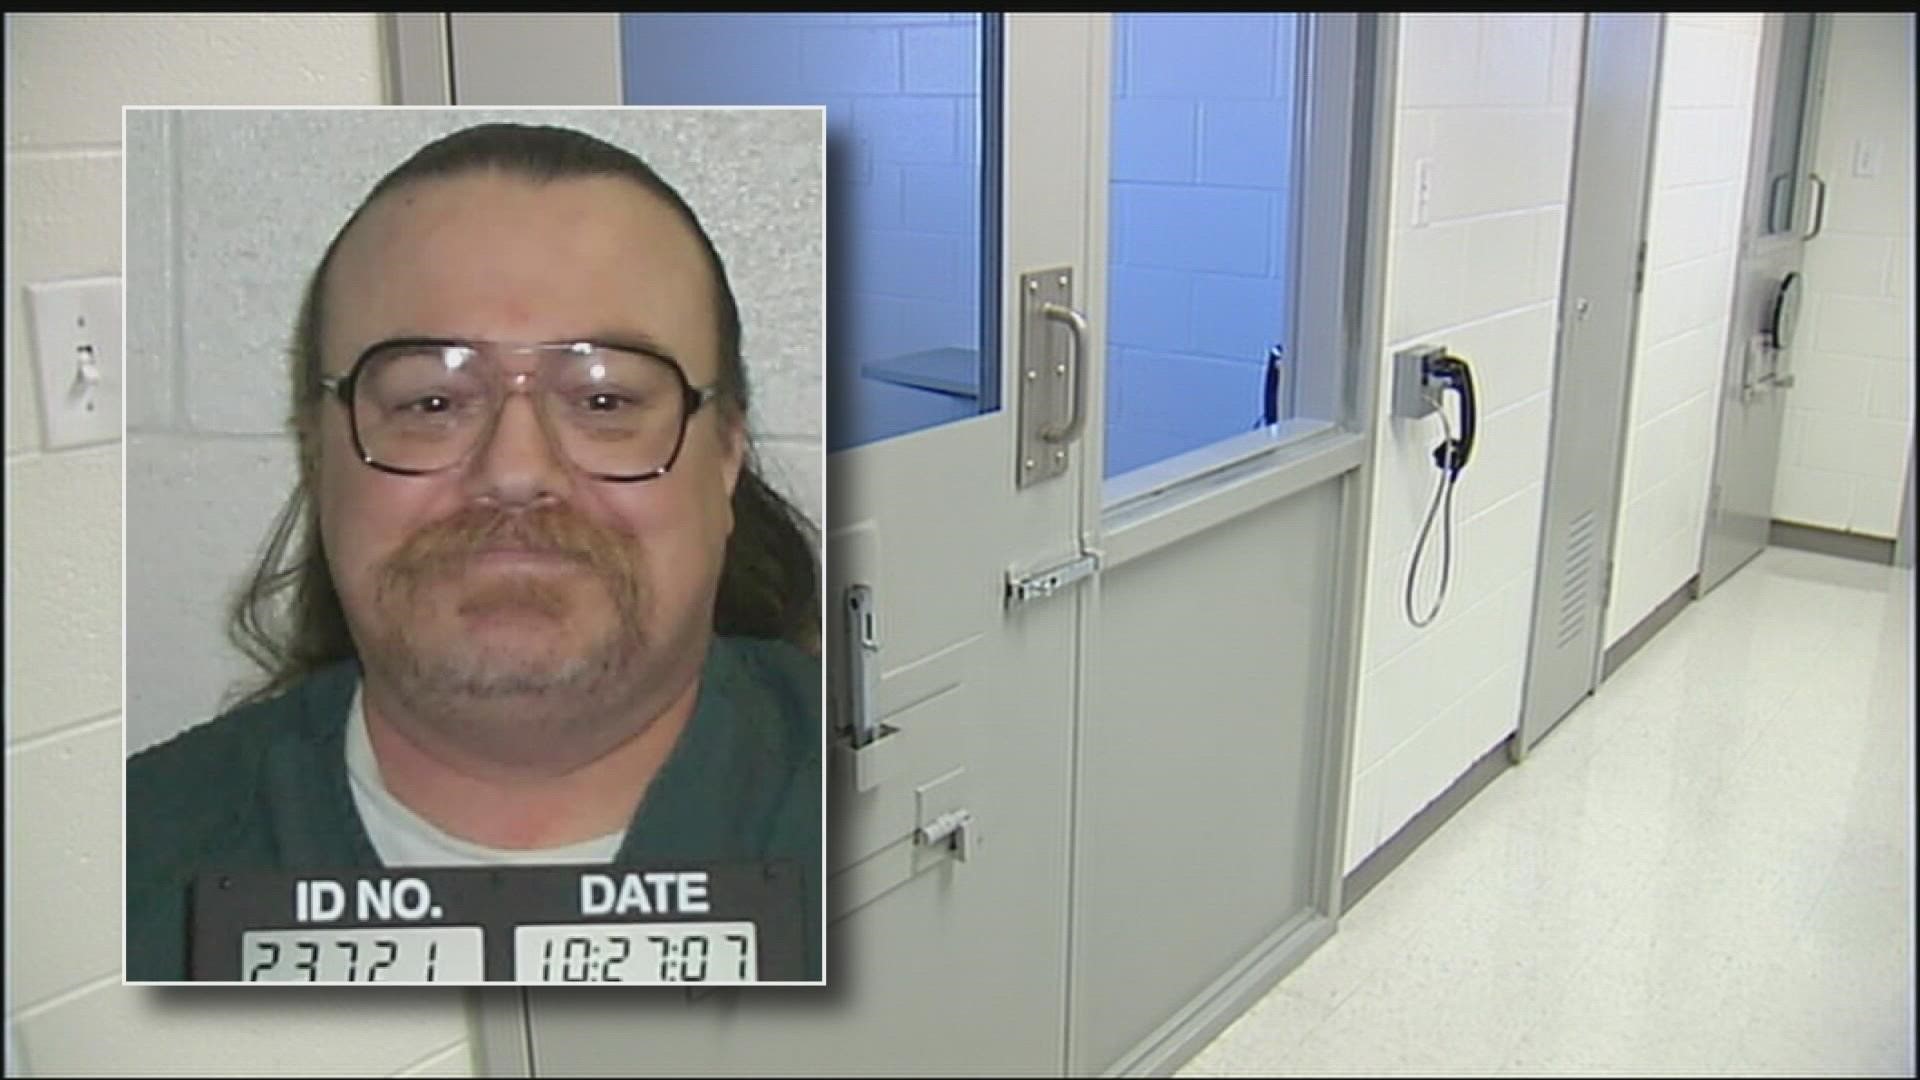 Pizzuto has spent more than three decades on death row and was originally scheduled to be put to death in June of 2021.